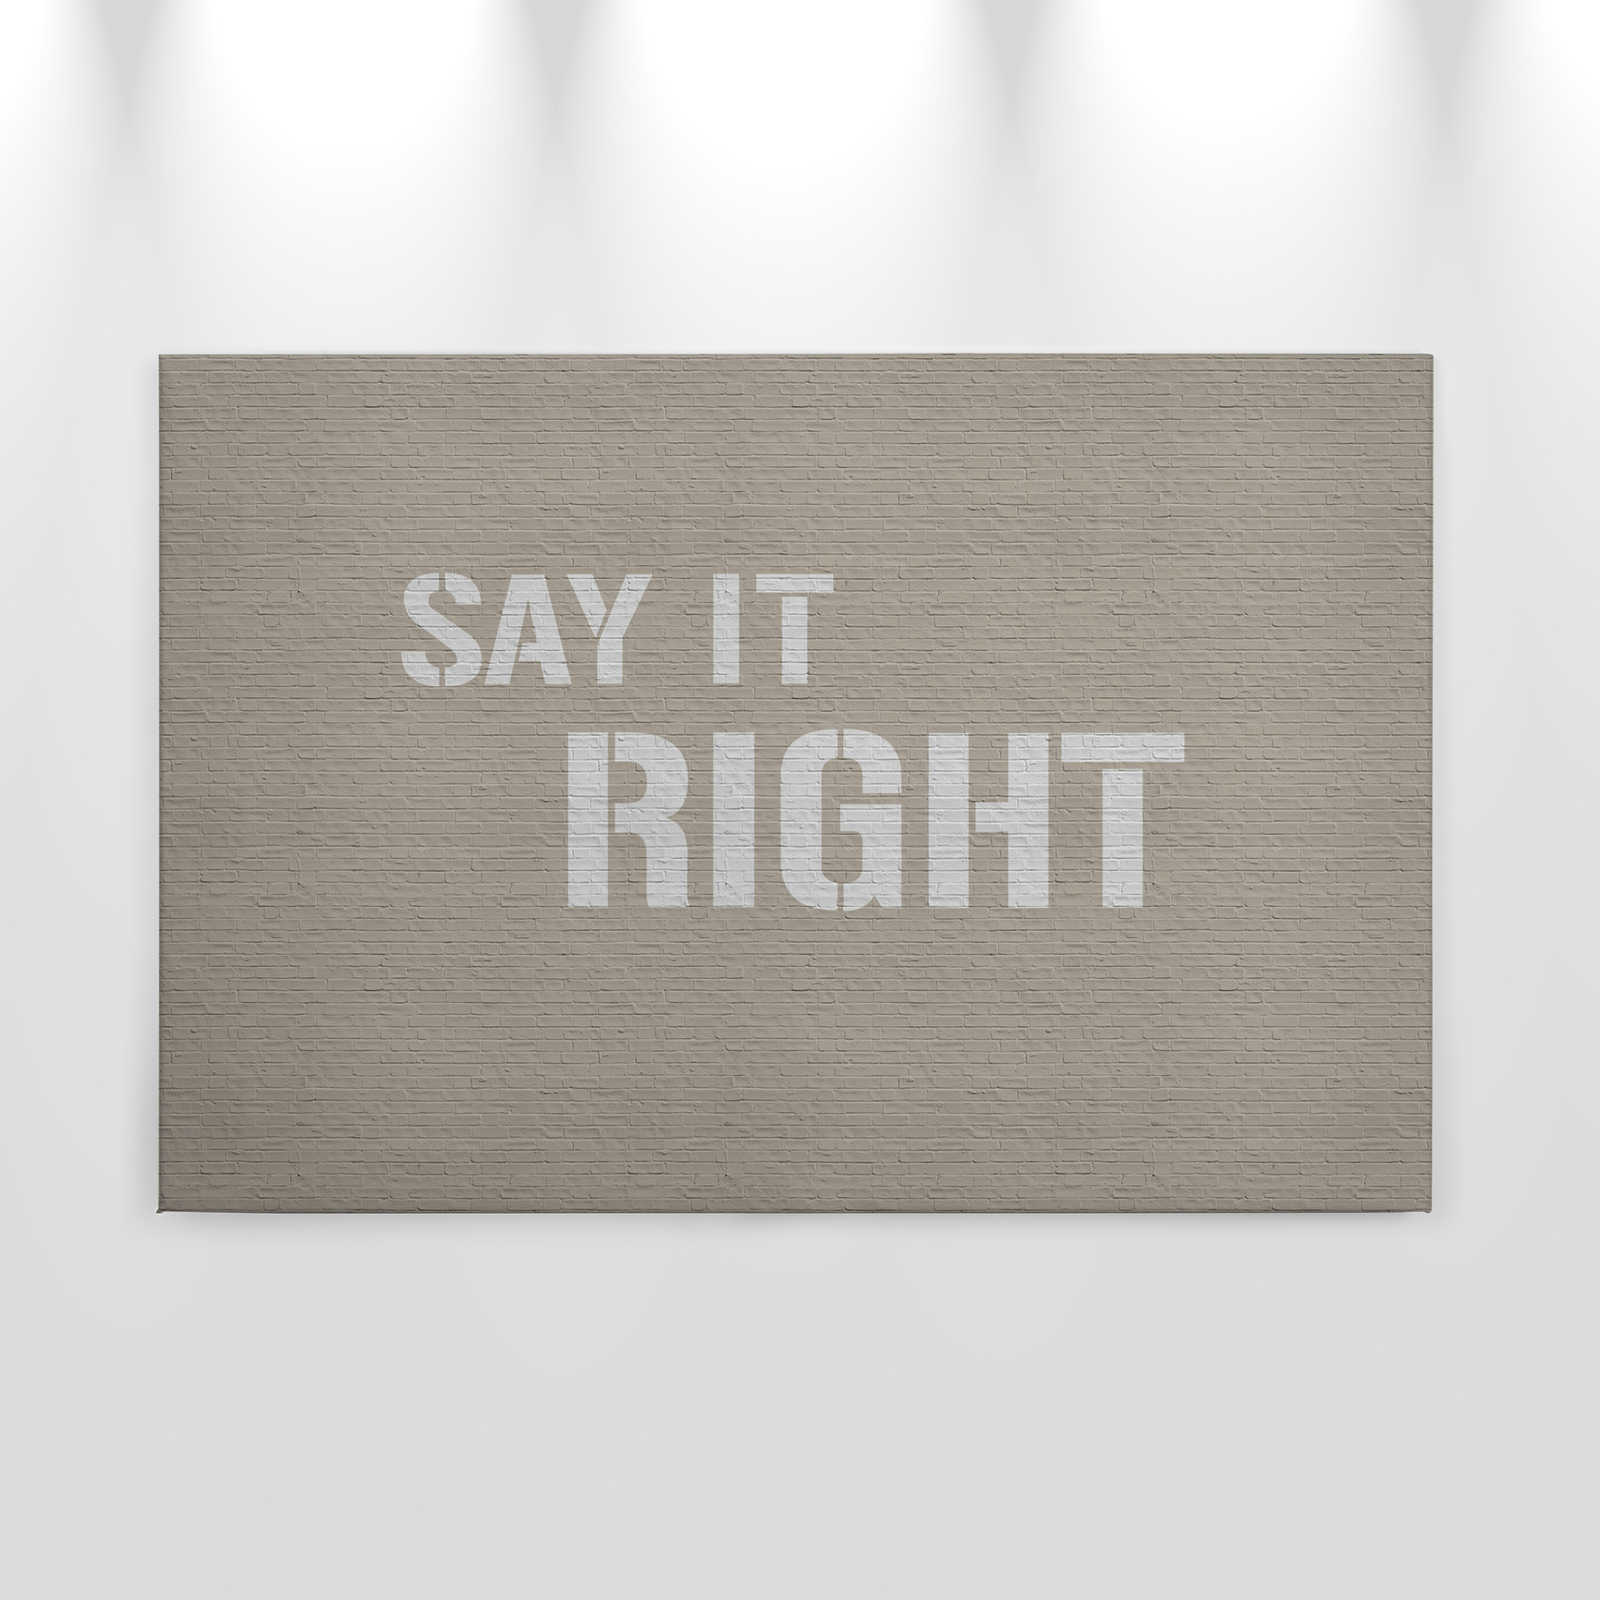             Message 2 - Beige clinker wall with saying as canvas picture - 0.90 m x 0.60 m
        